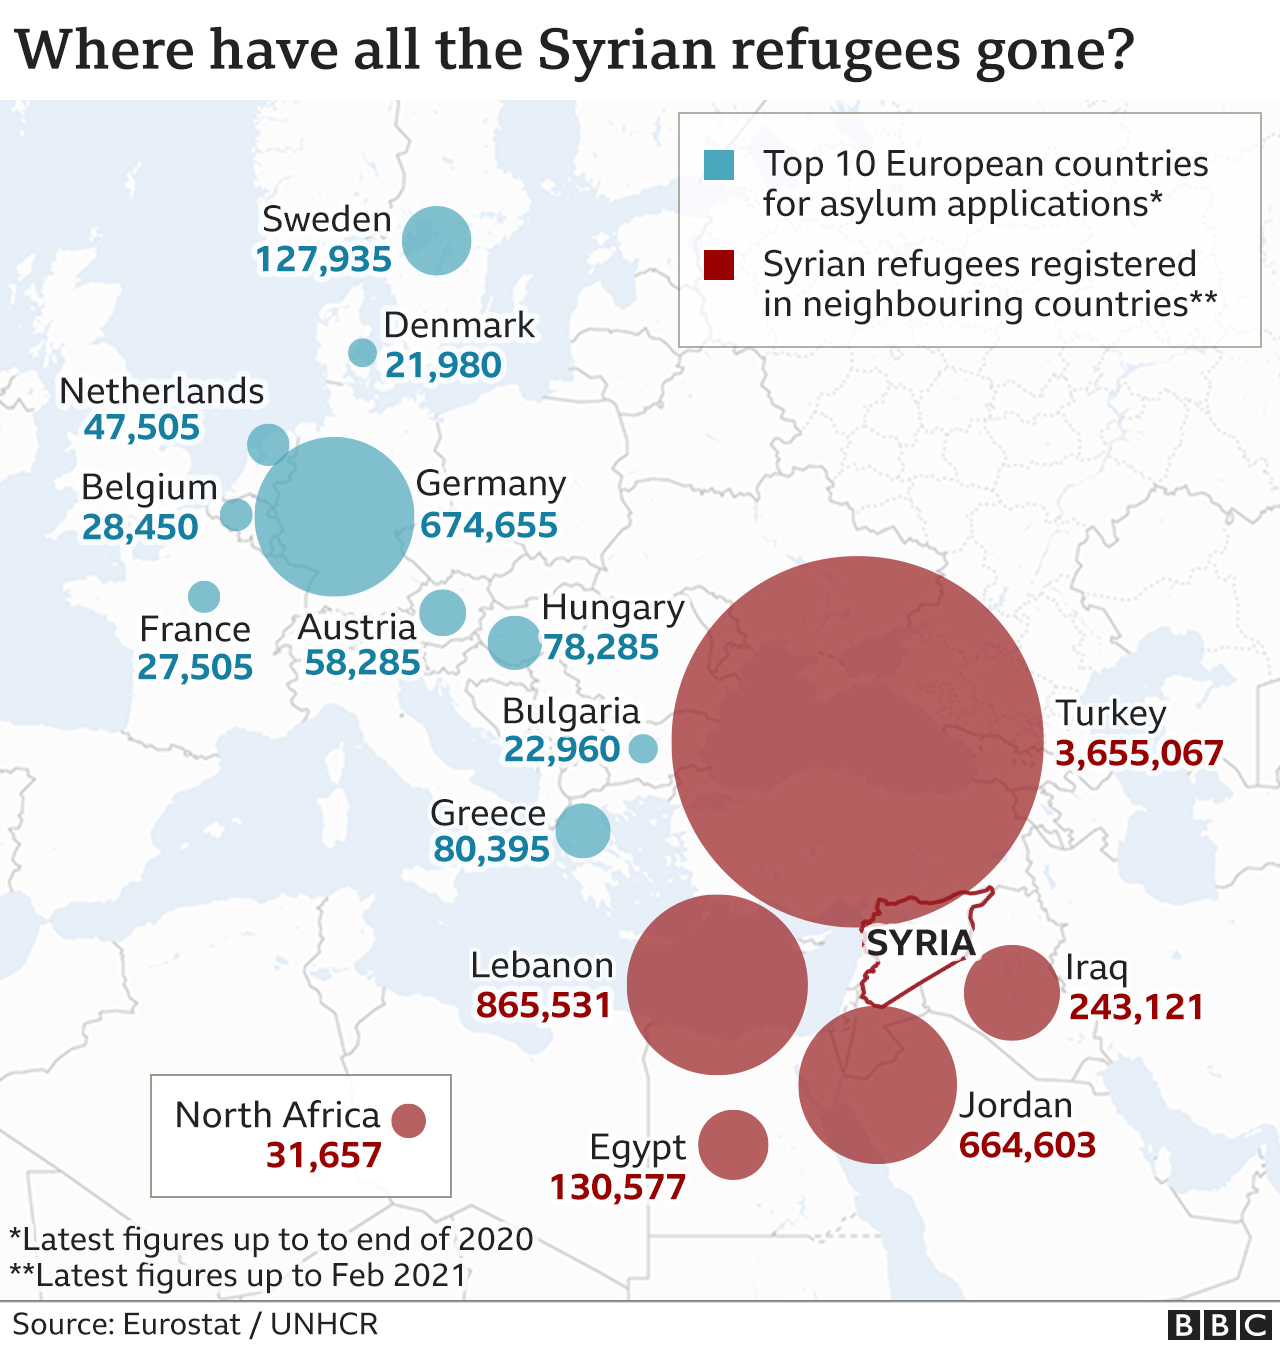 Chart showing locations of Syrian refugees in Middle East, North Africa and Europe